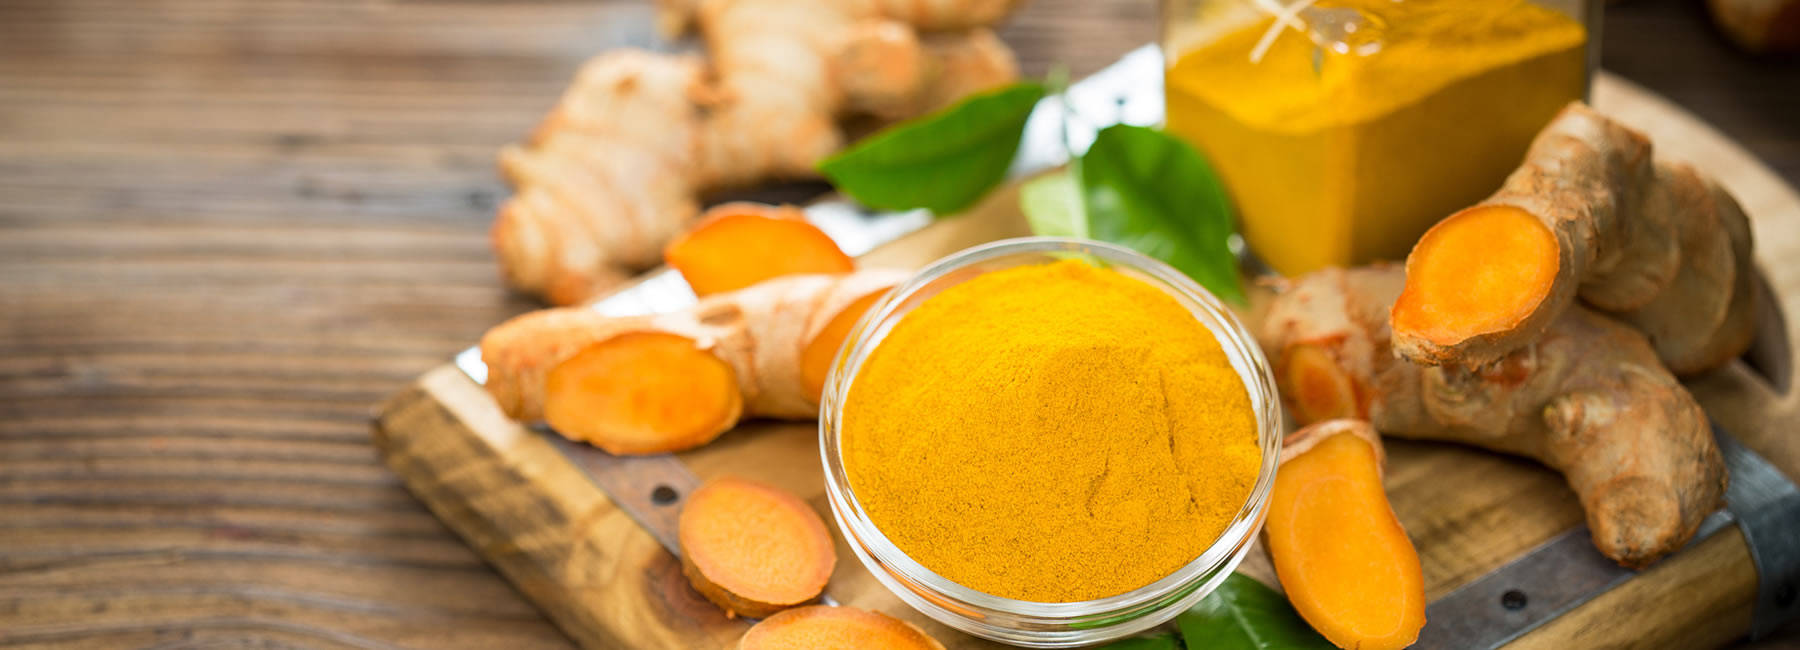 Leading manufacturer of Curcumin powder with Global exports to the US, Europe, South America and Japan